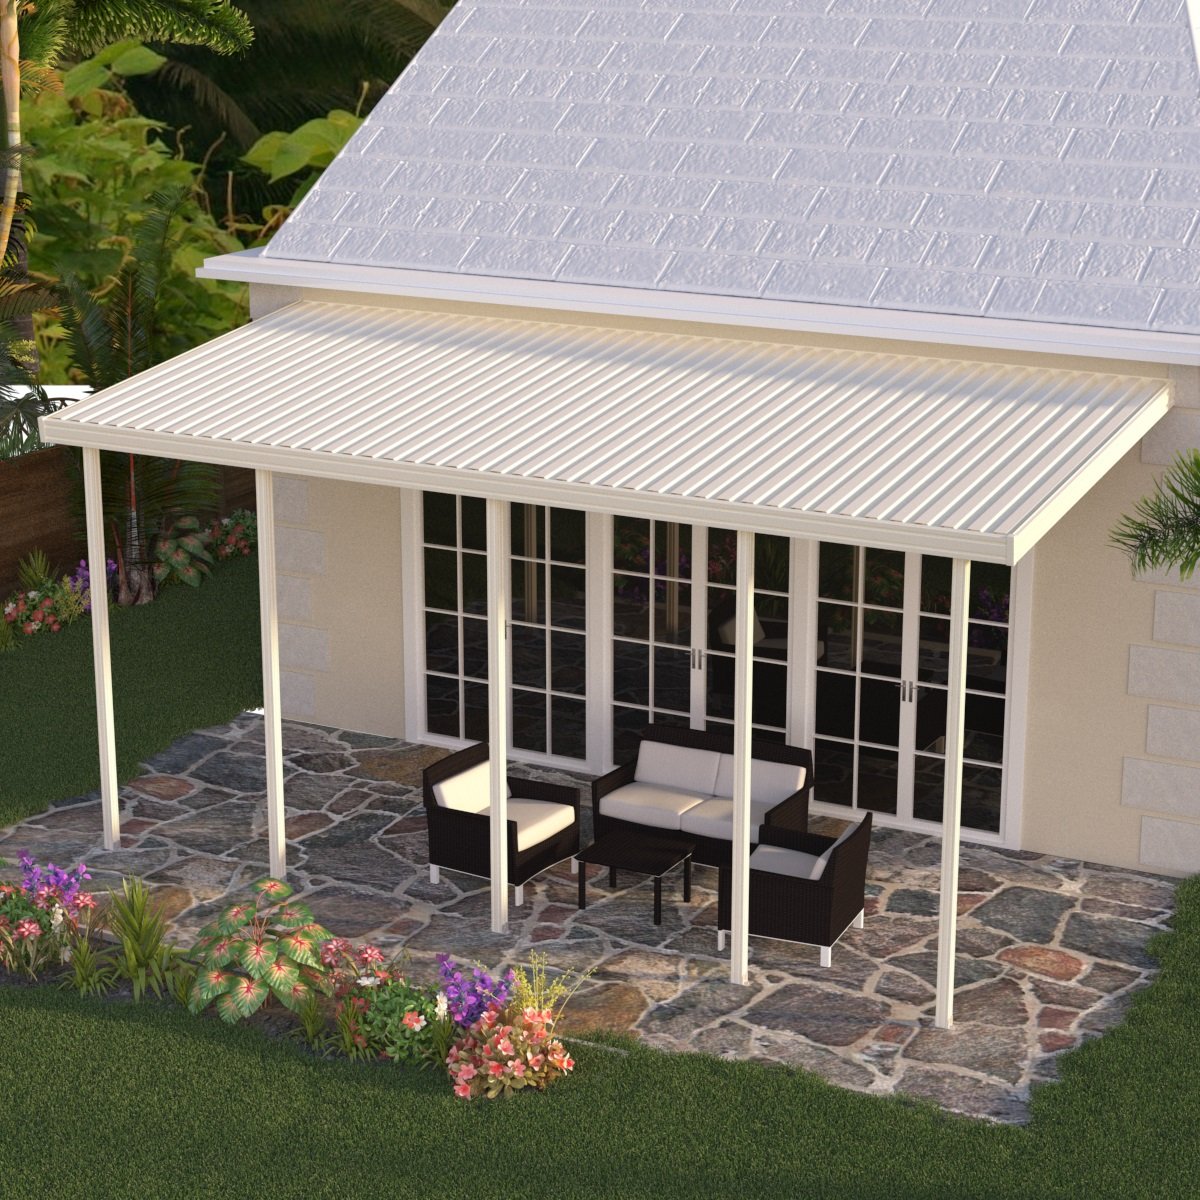 12 ft. Deep x 20 ft. Wide Ivory Attached Aluminum Patio Cover -4 Posts - (10lb Low Snow Area)